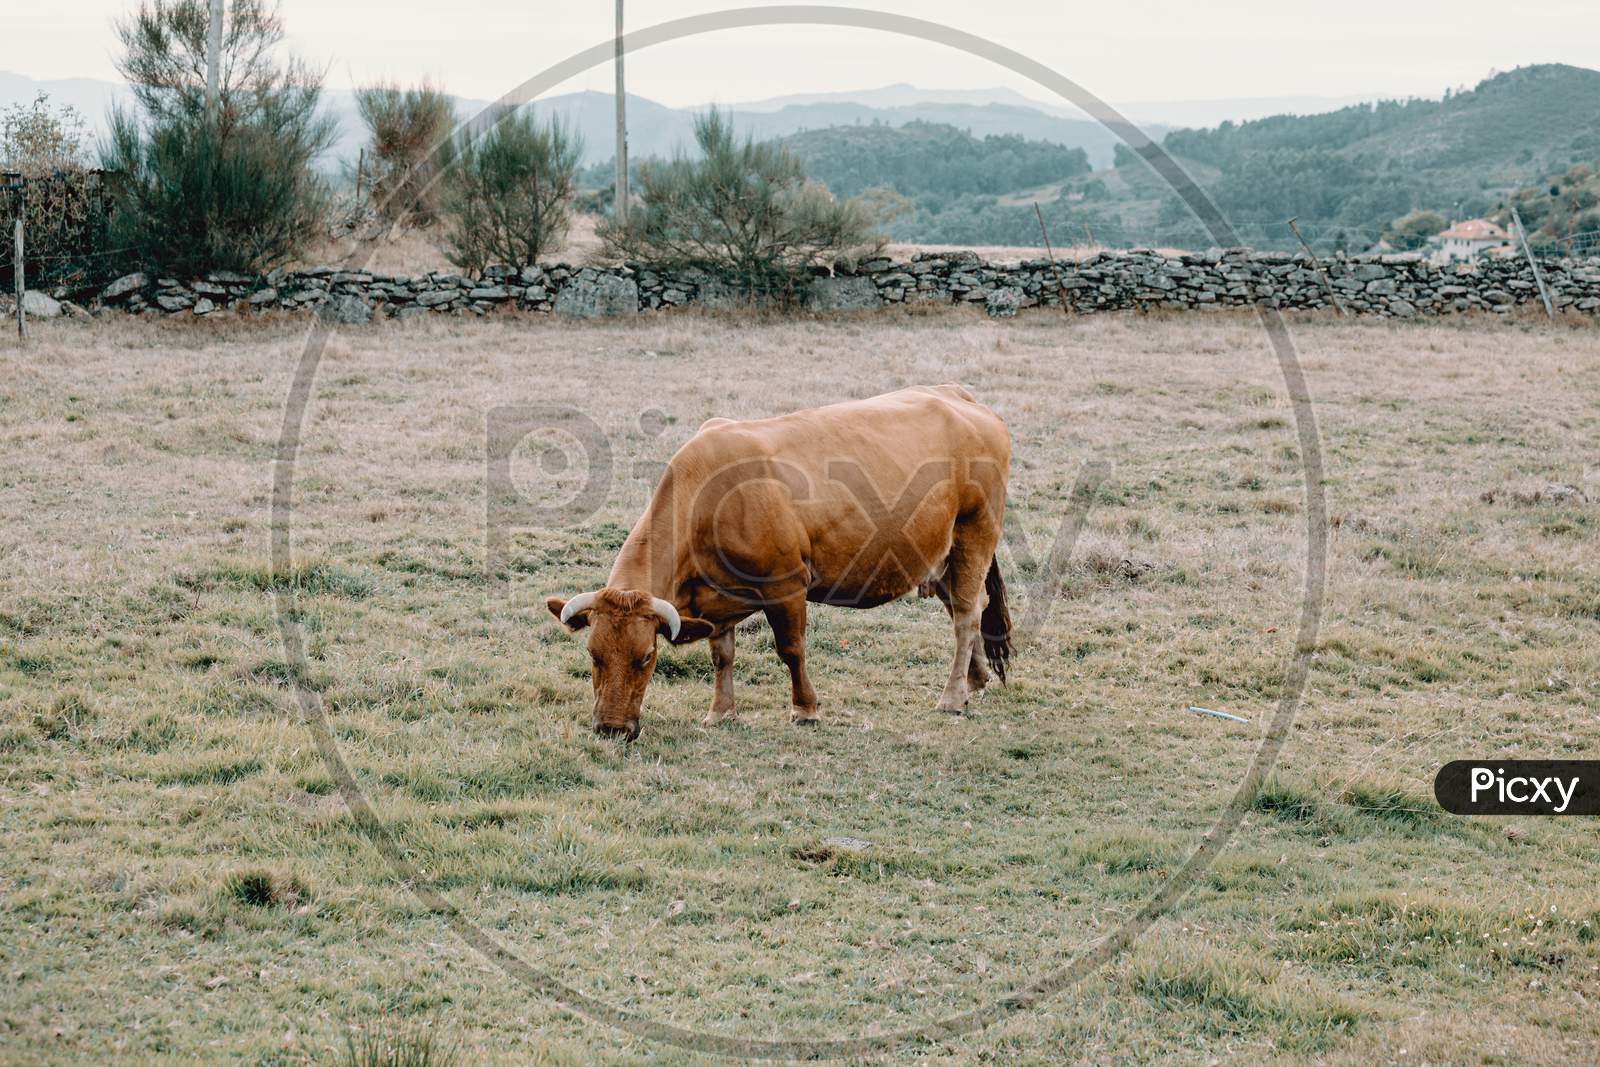 Giant Brown Cow Eating Grass In The Middle Of The Farm